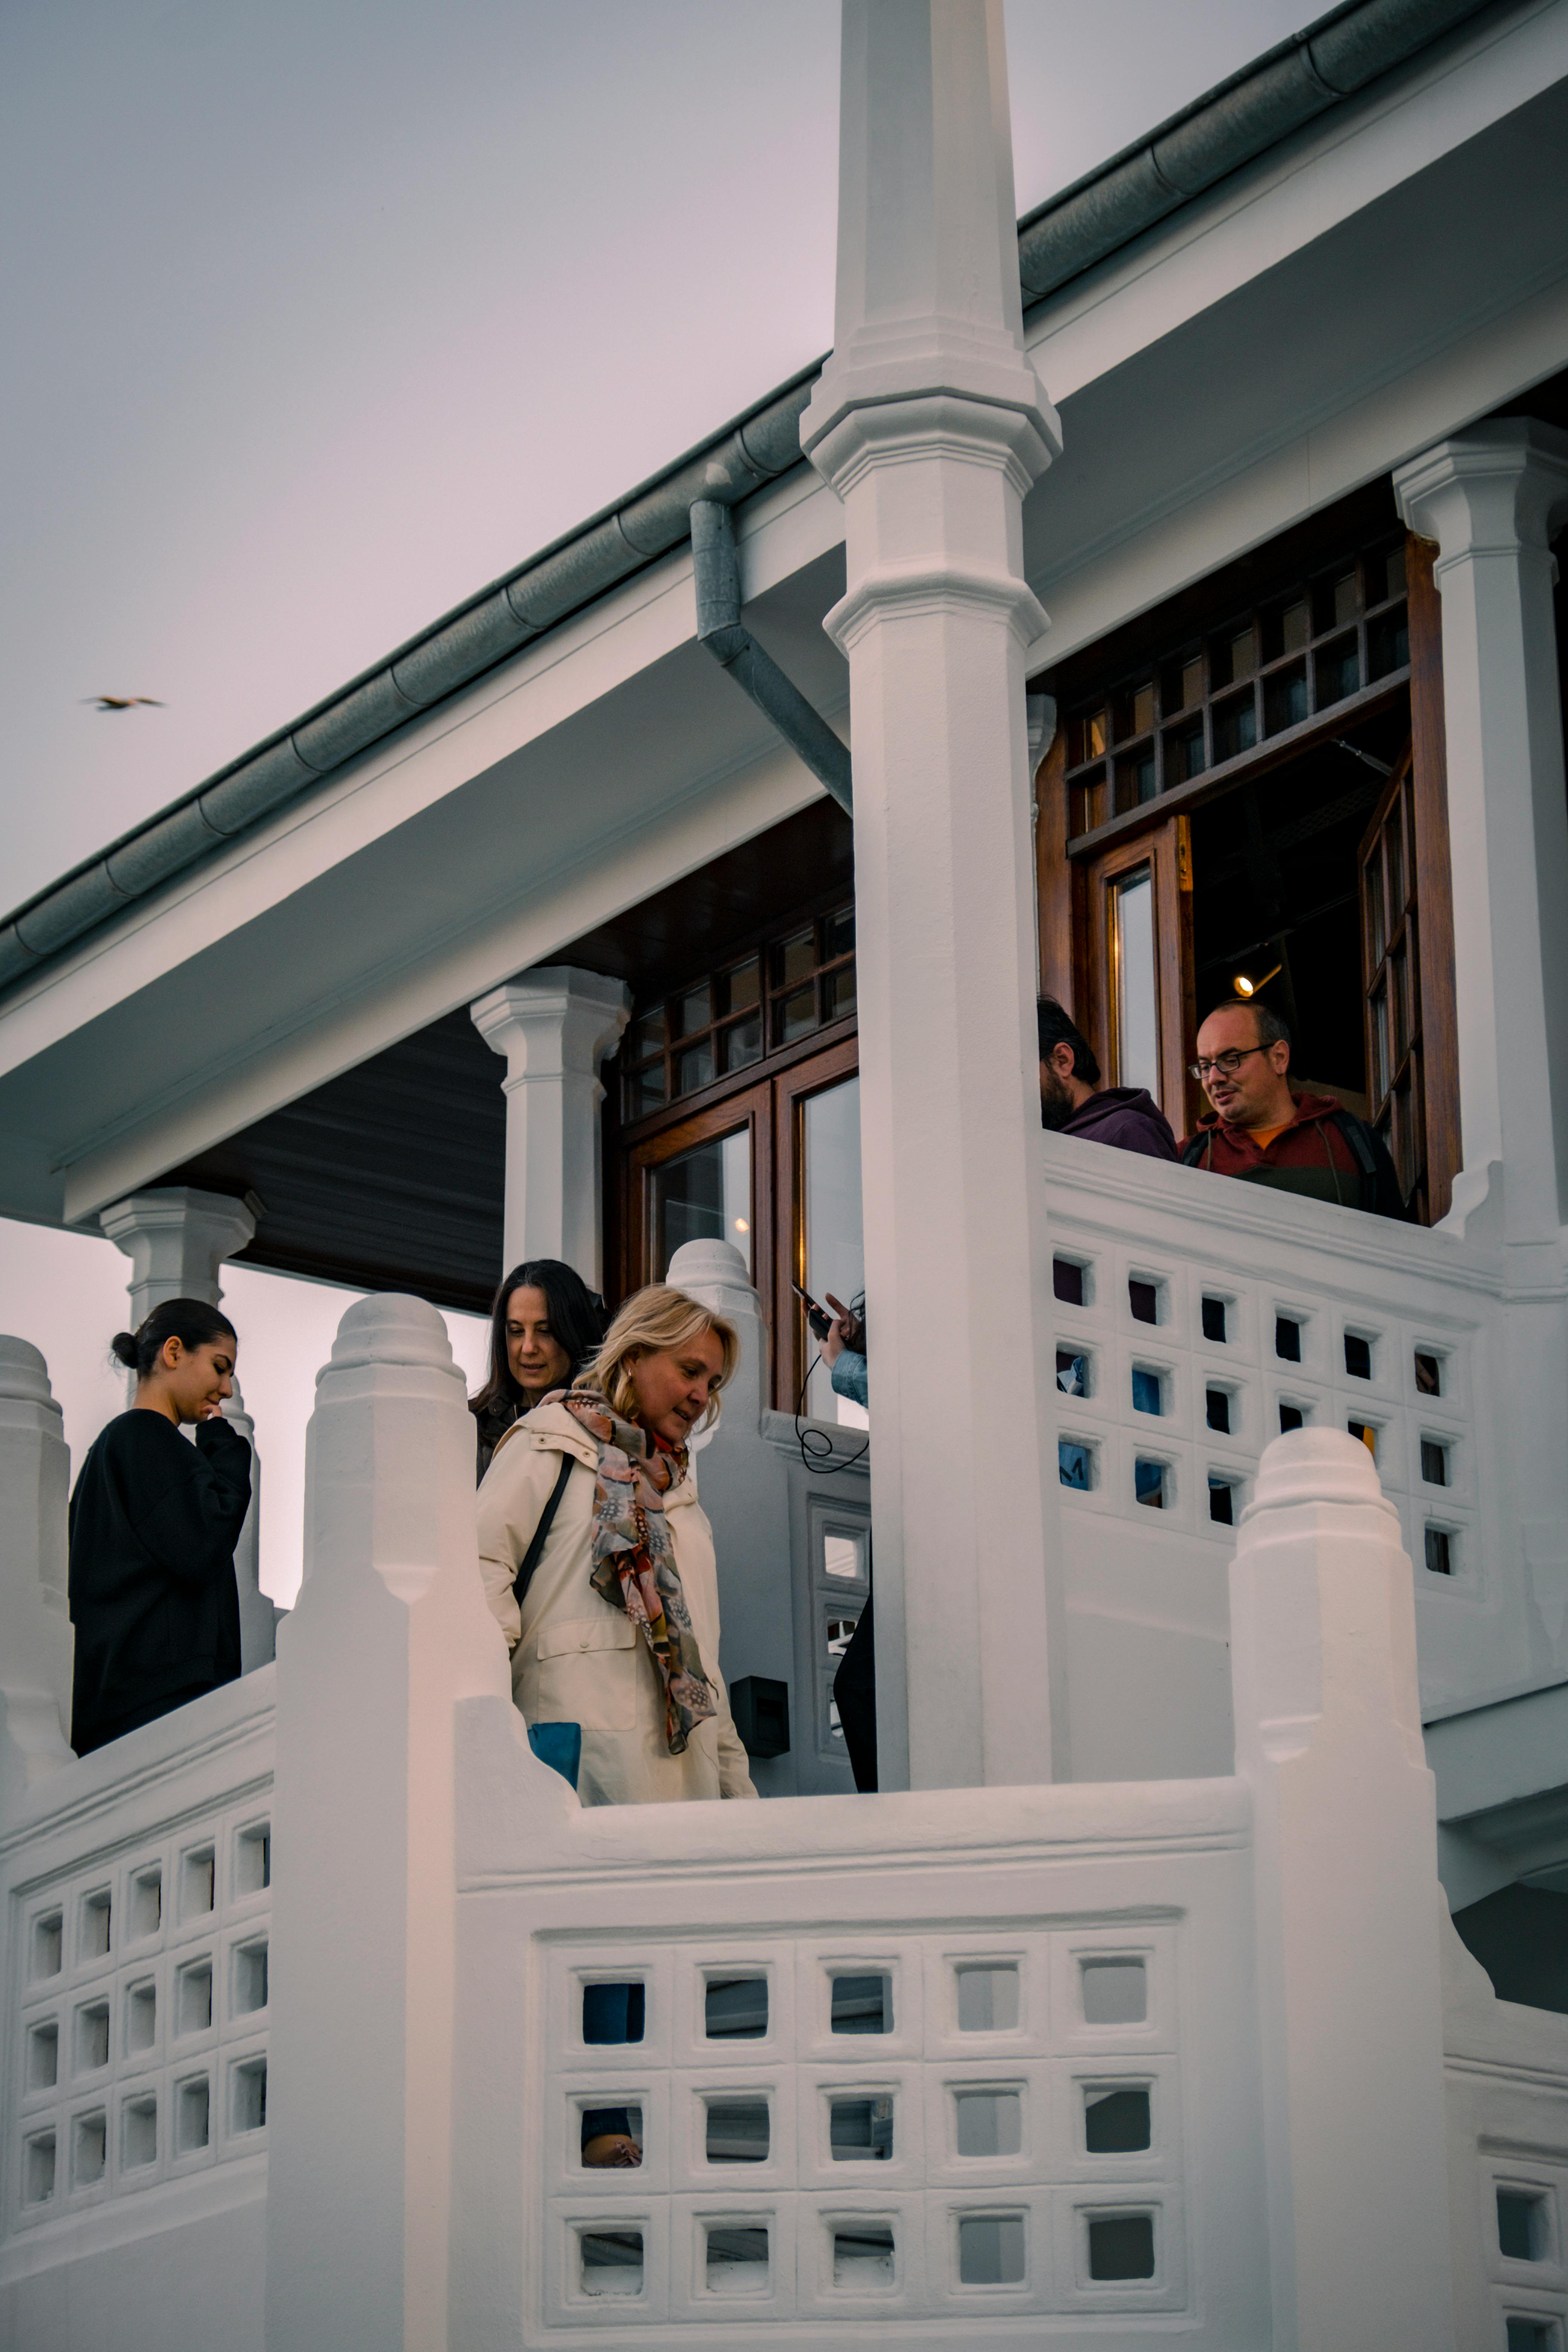 People on the staircase in front of a house | Source: Pexels